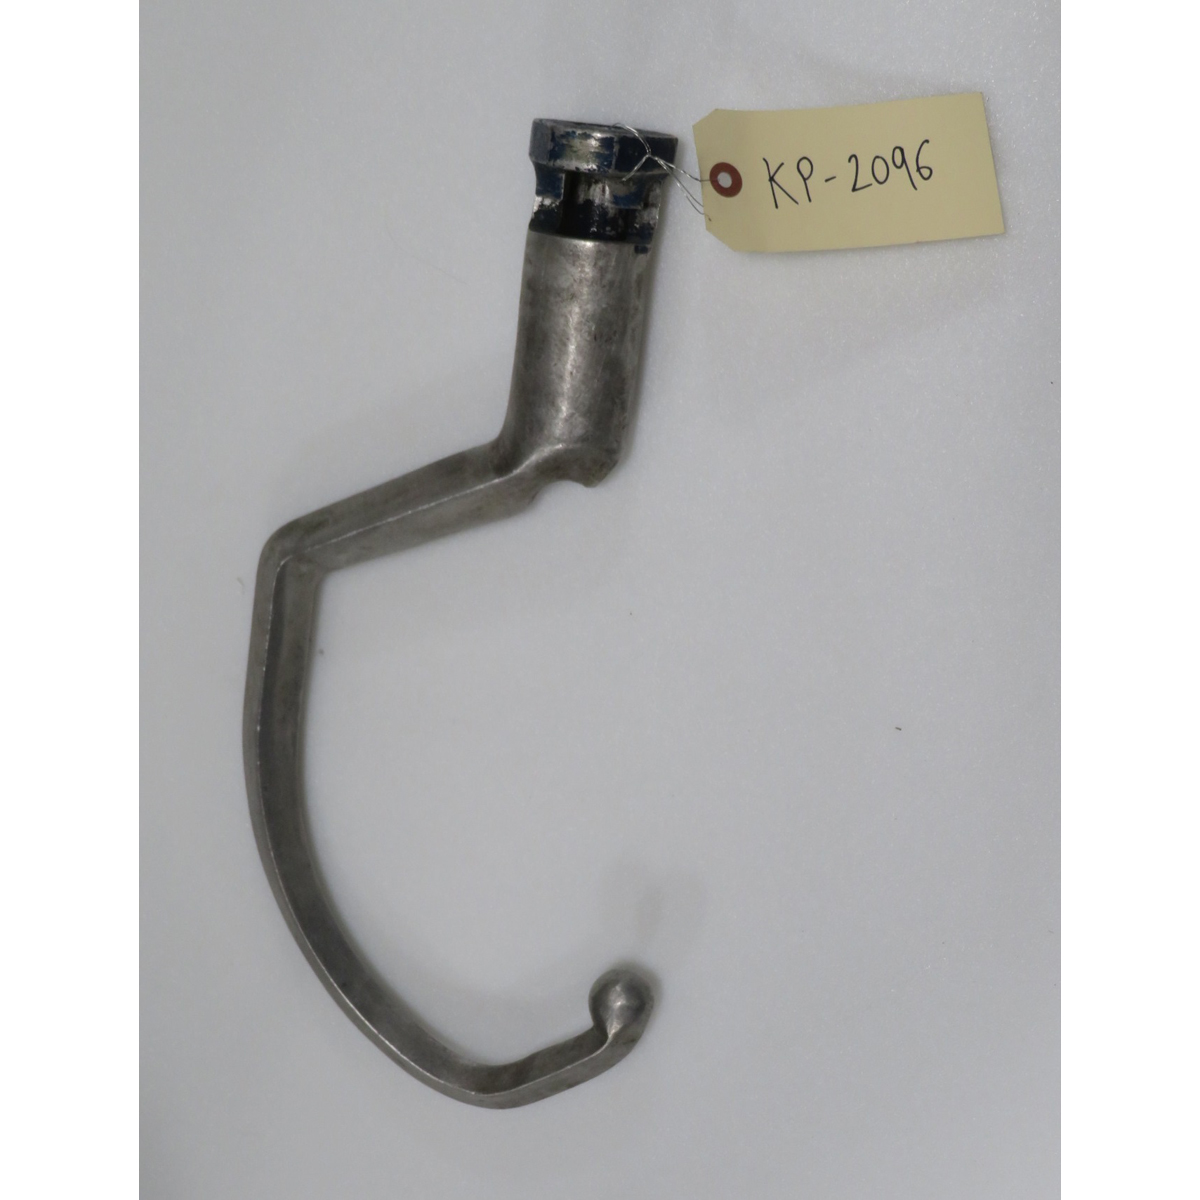 Hobart R-10249 "E" Dough Arm Hook For D300 & S301 Mixer, Used Excellent Condition